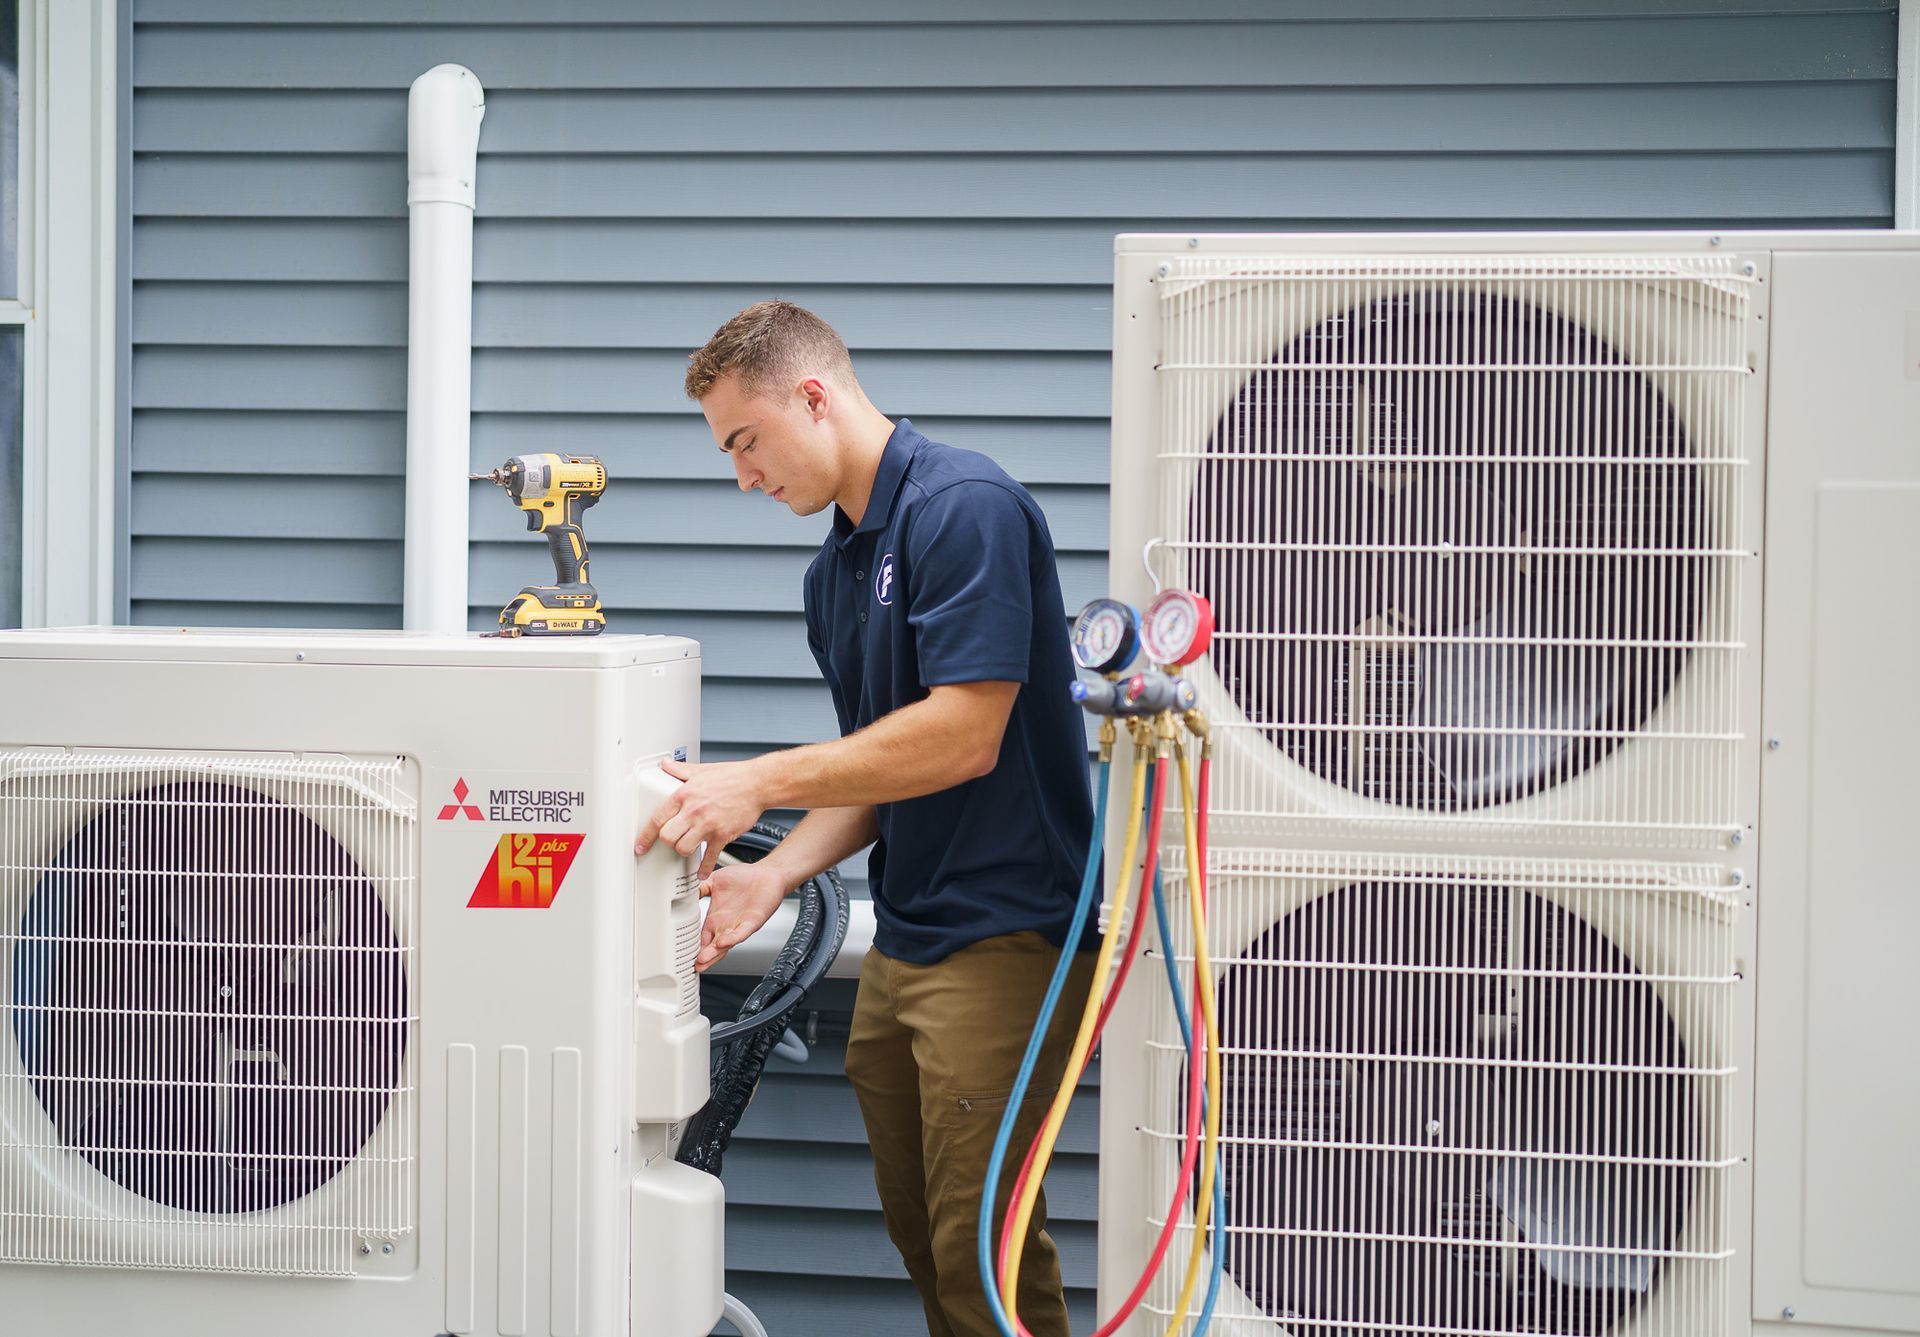 Prevett Heating and Cooling |A man is working on an air conditioner outside of a house.